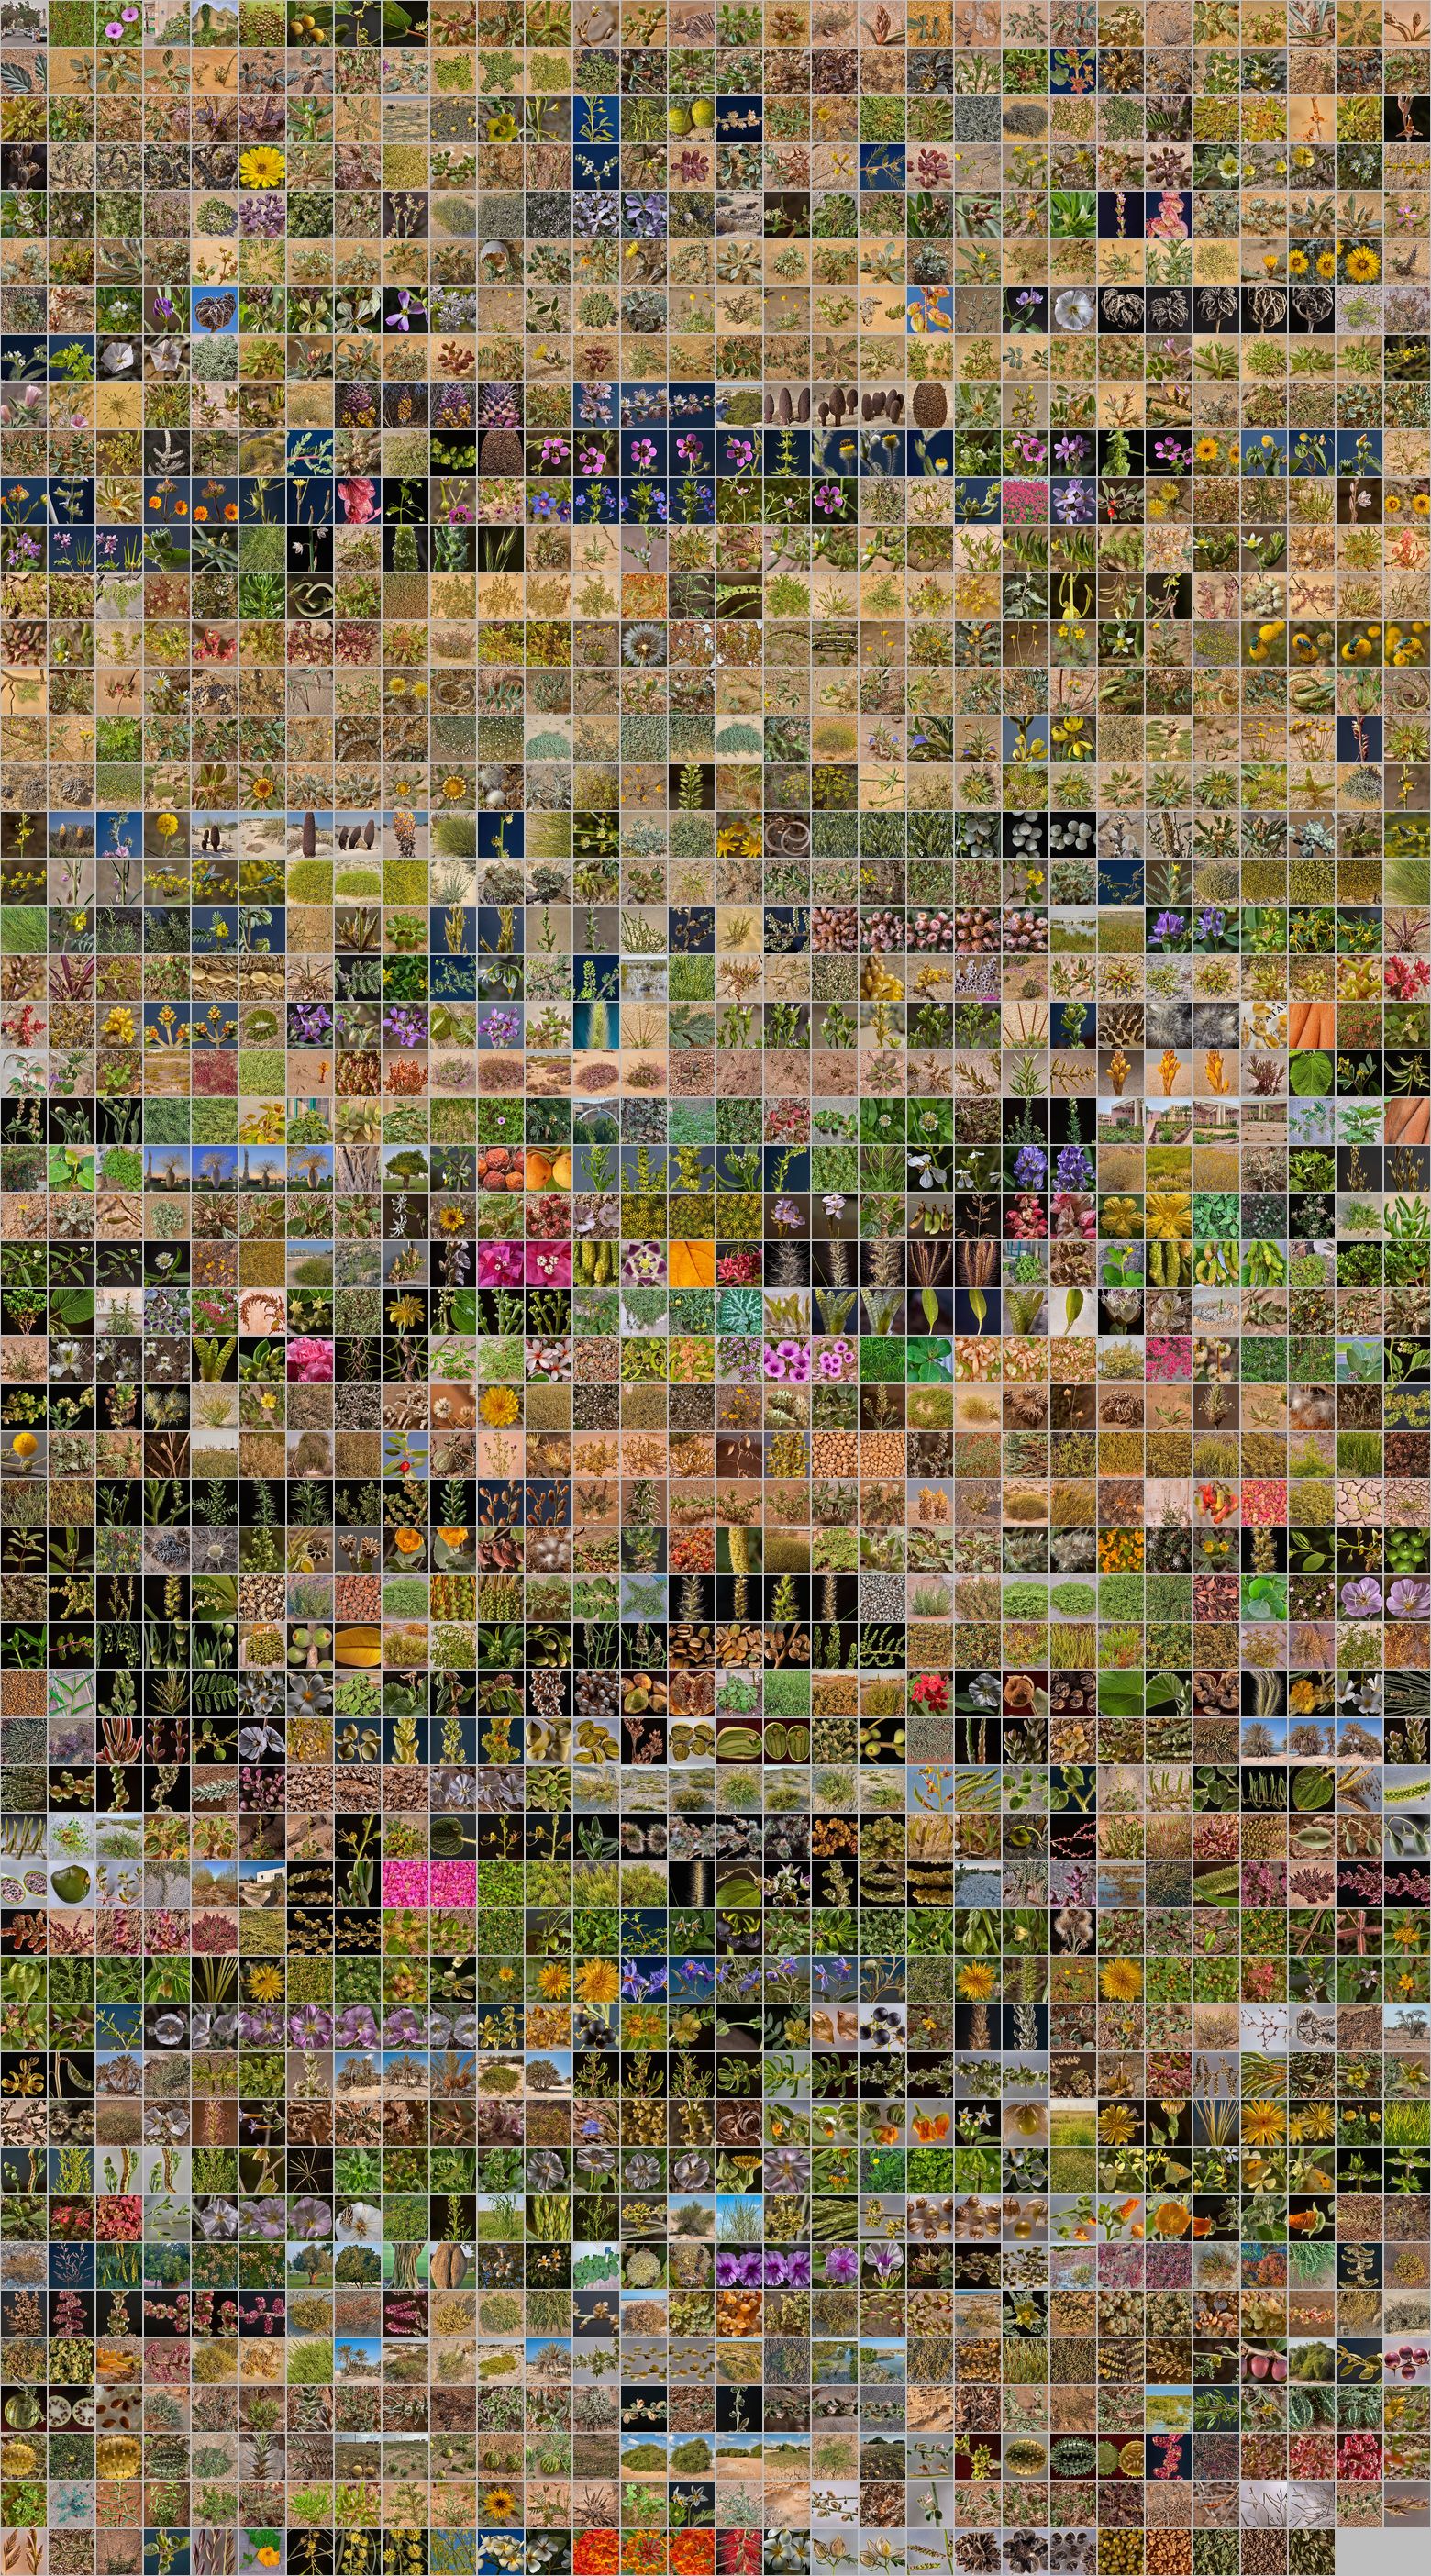 Photomontage of pictures of plants in Qatar. Year 2014